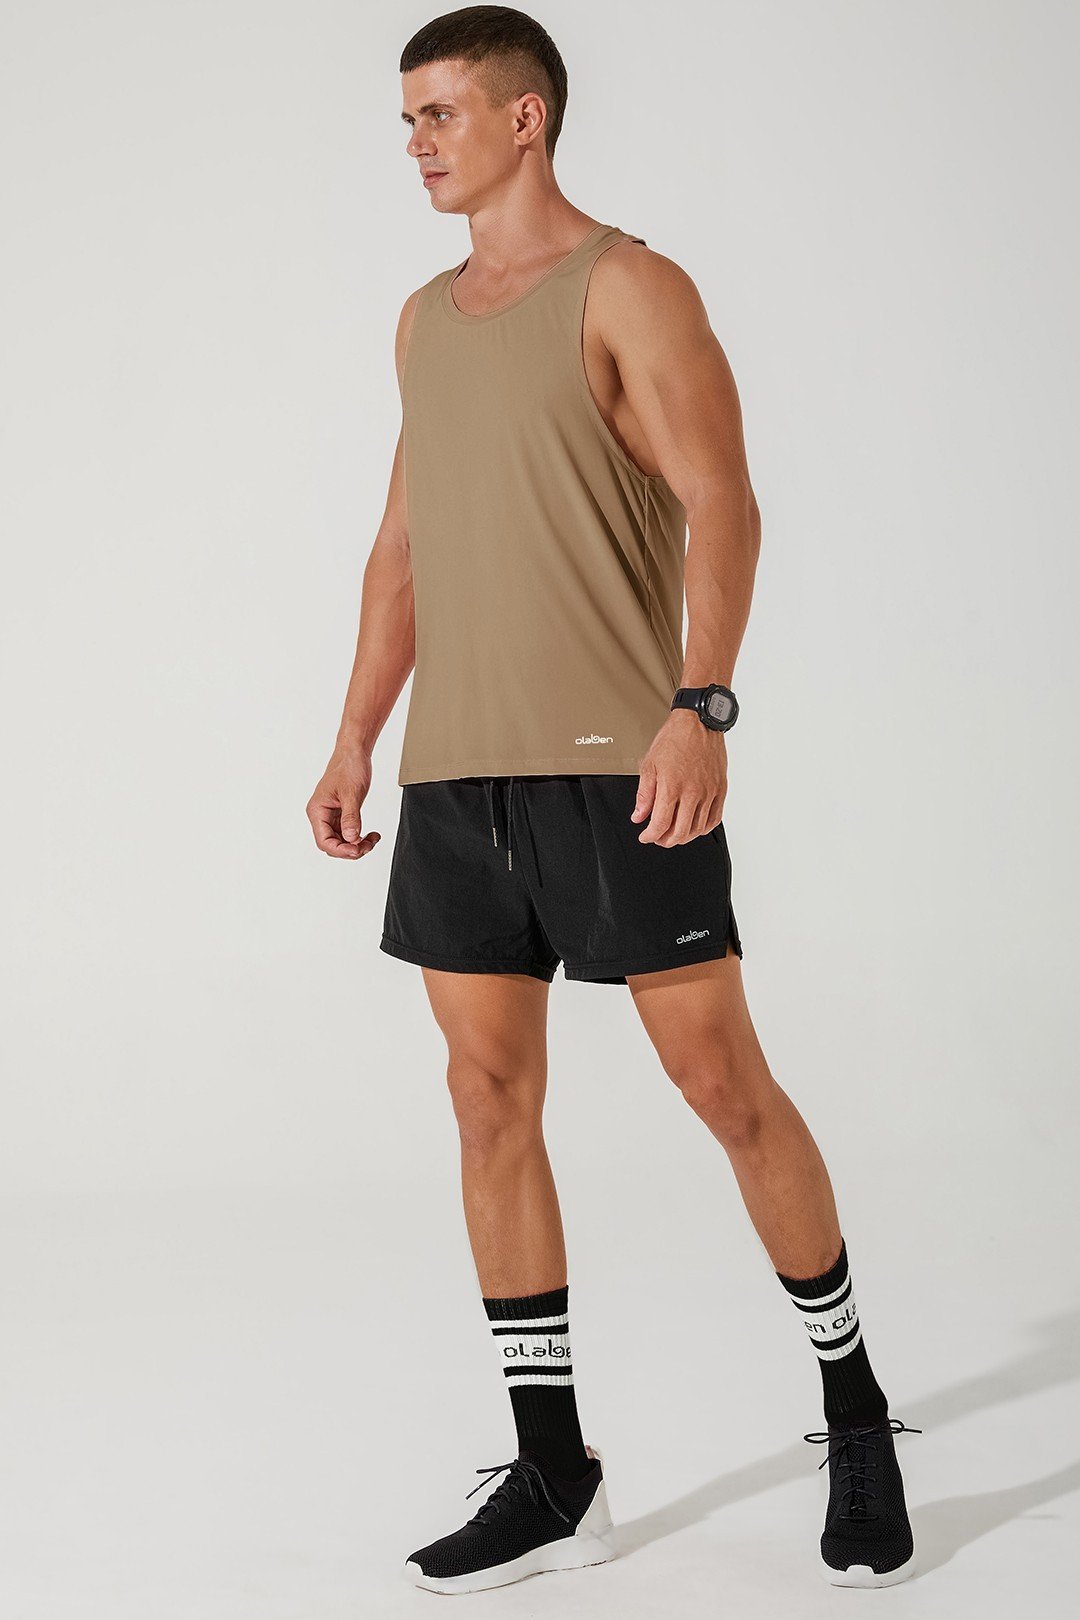 Men's cappuccino beige tank top by Ricard Tank - stylish and comfortable fashion choice.